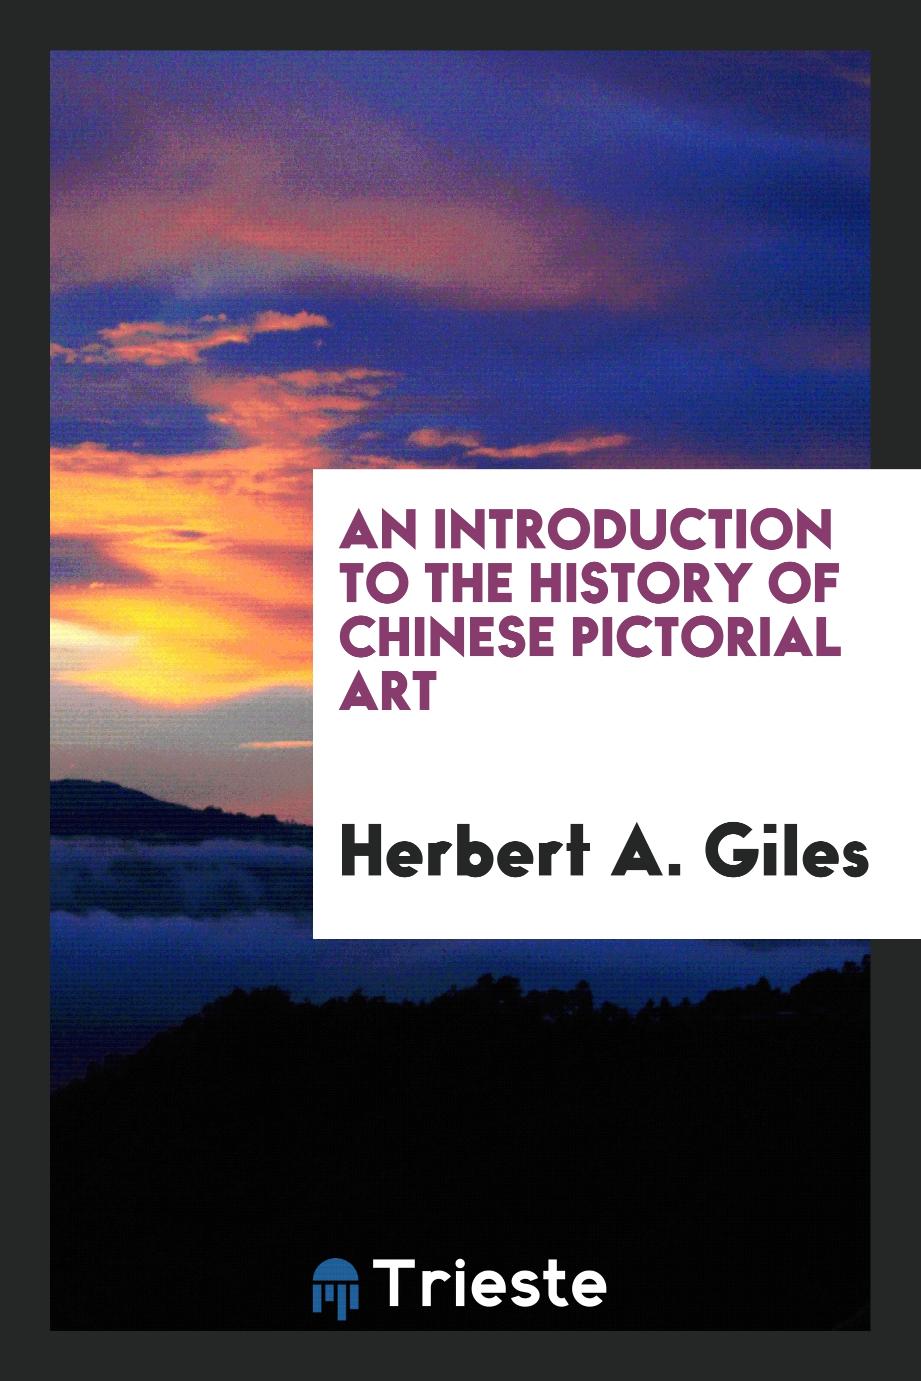 An Introduction to the History of Chinese Pictorial Art